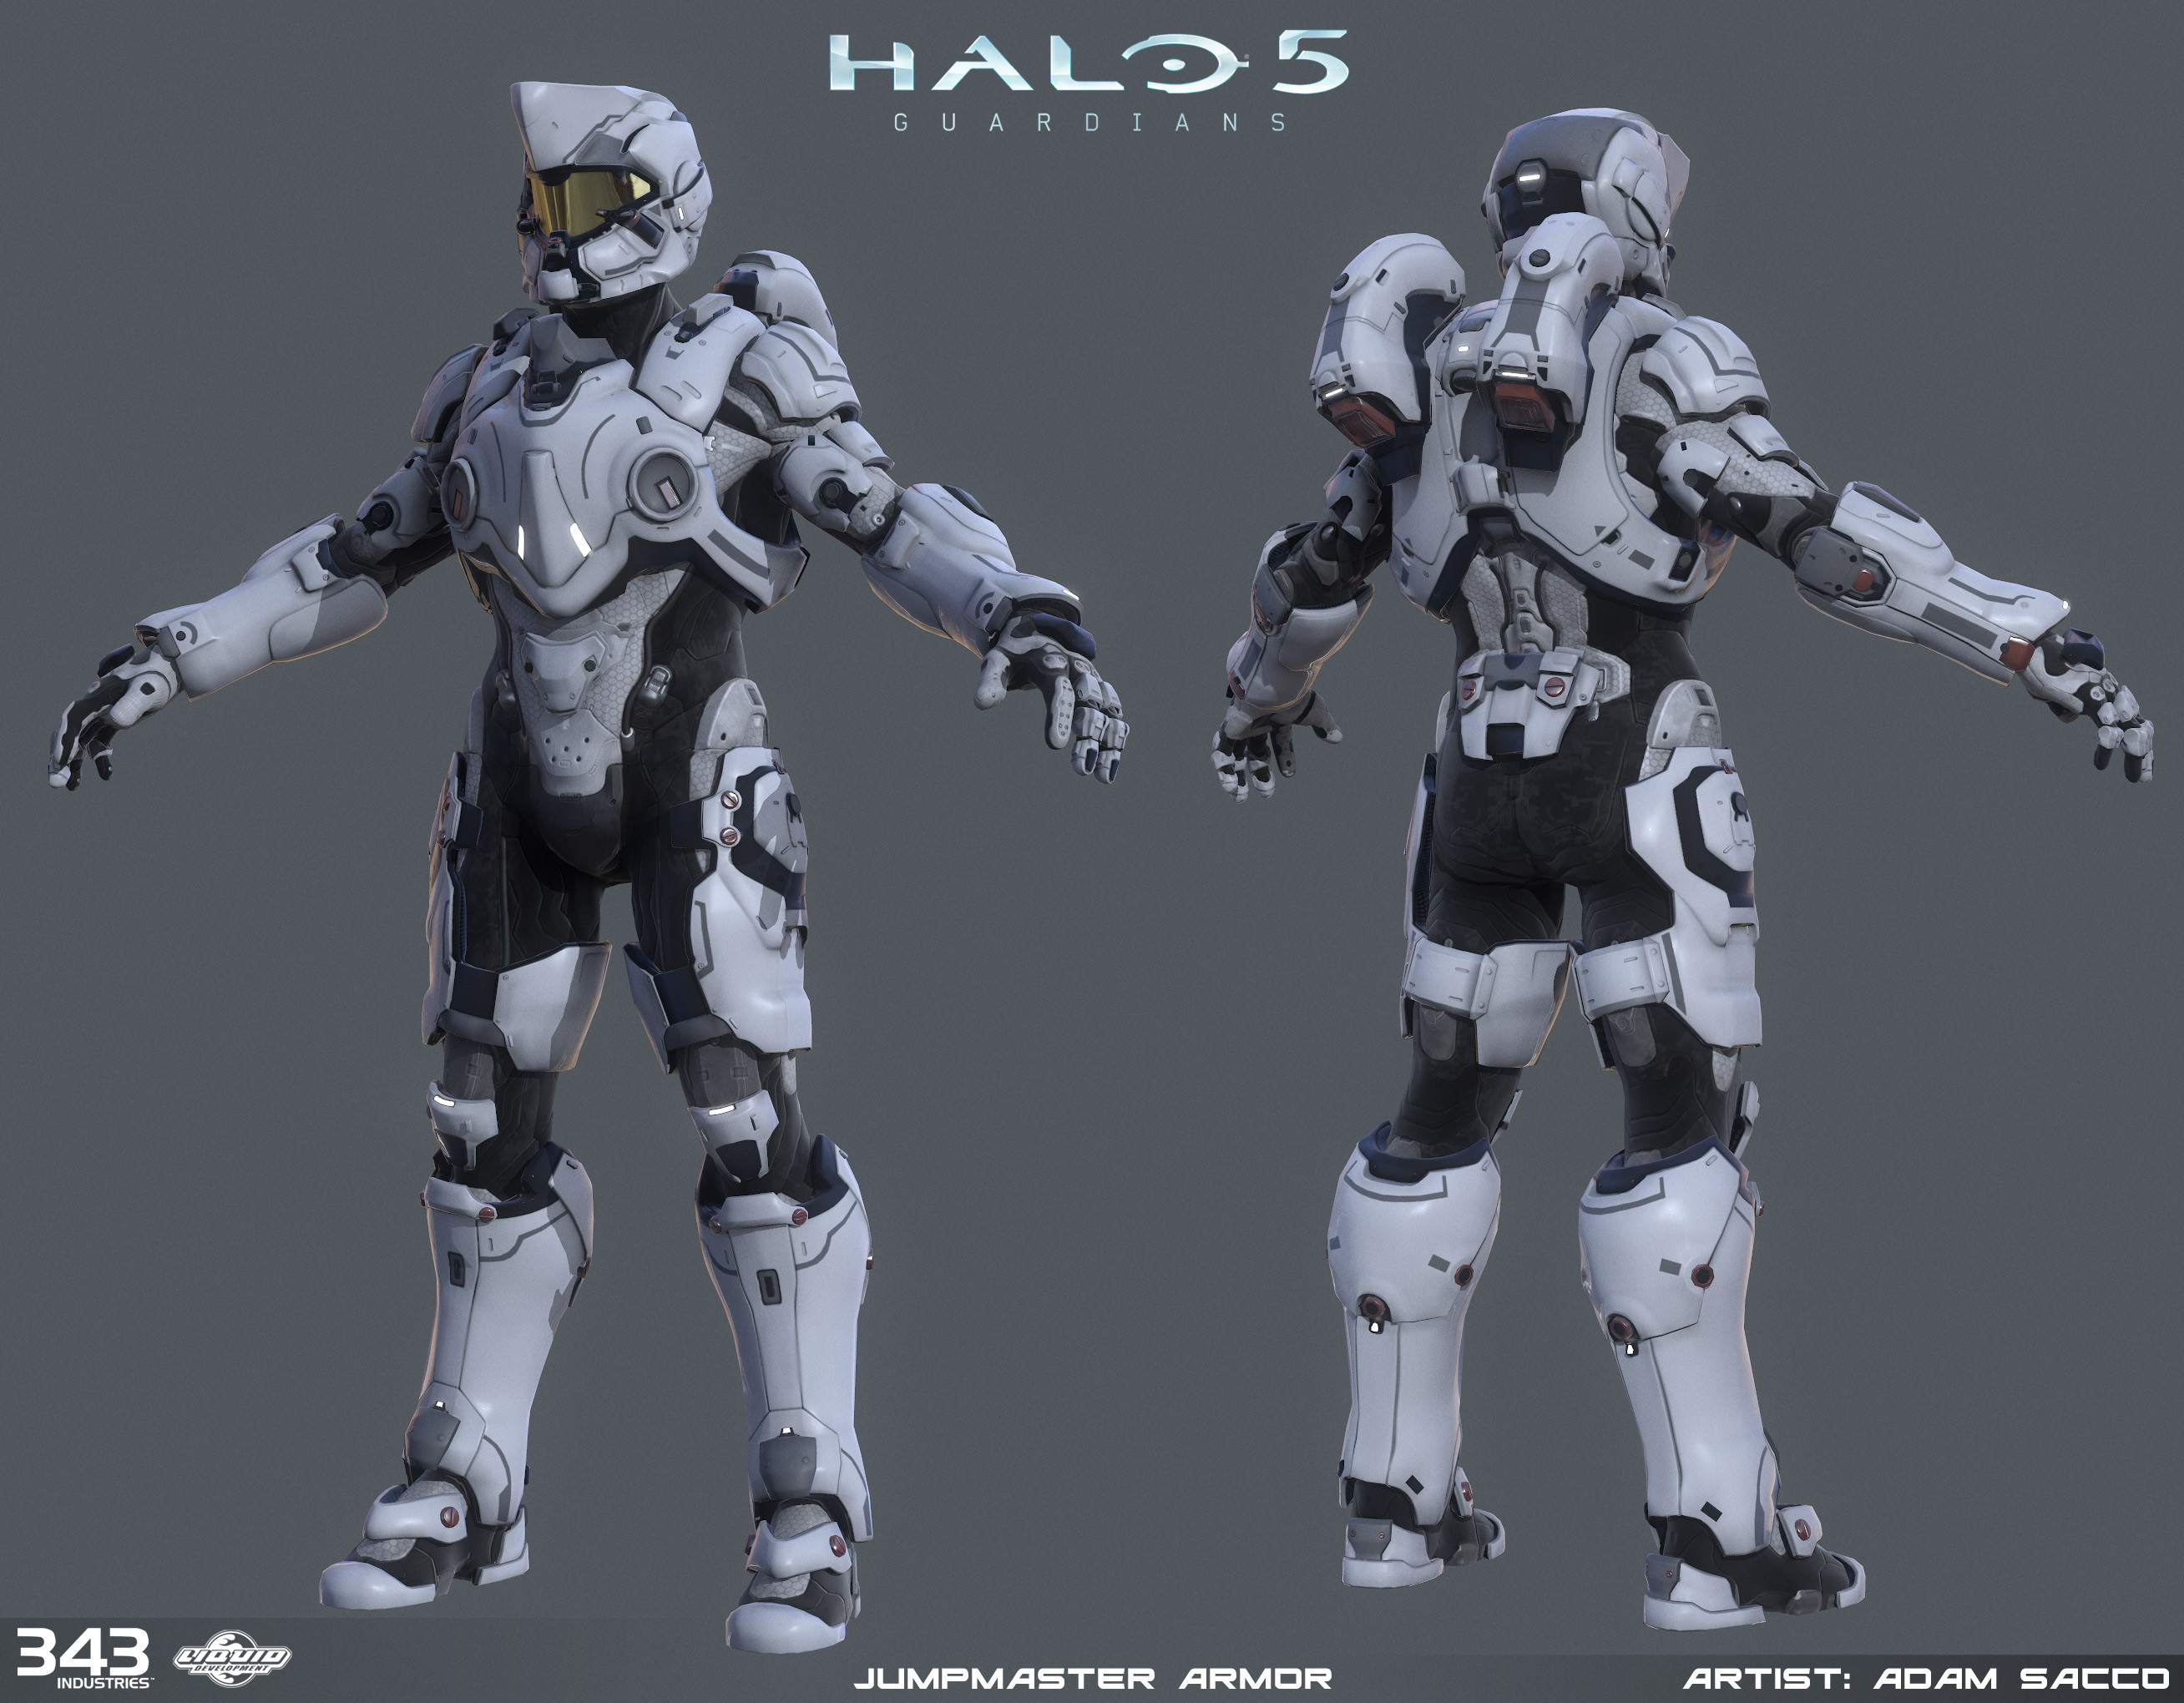 Halo 5 - Jumpmaster armor - Lowpoly and bakes